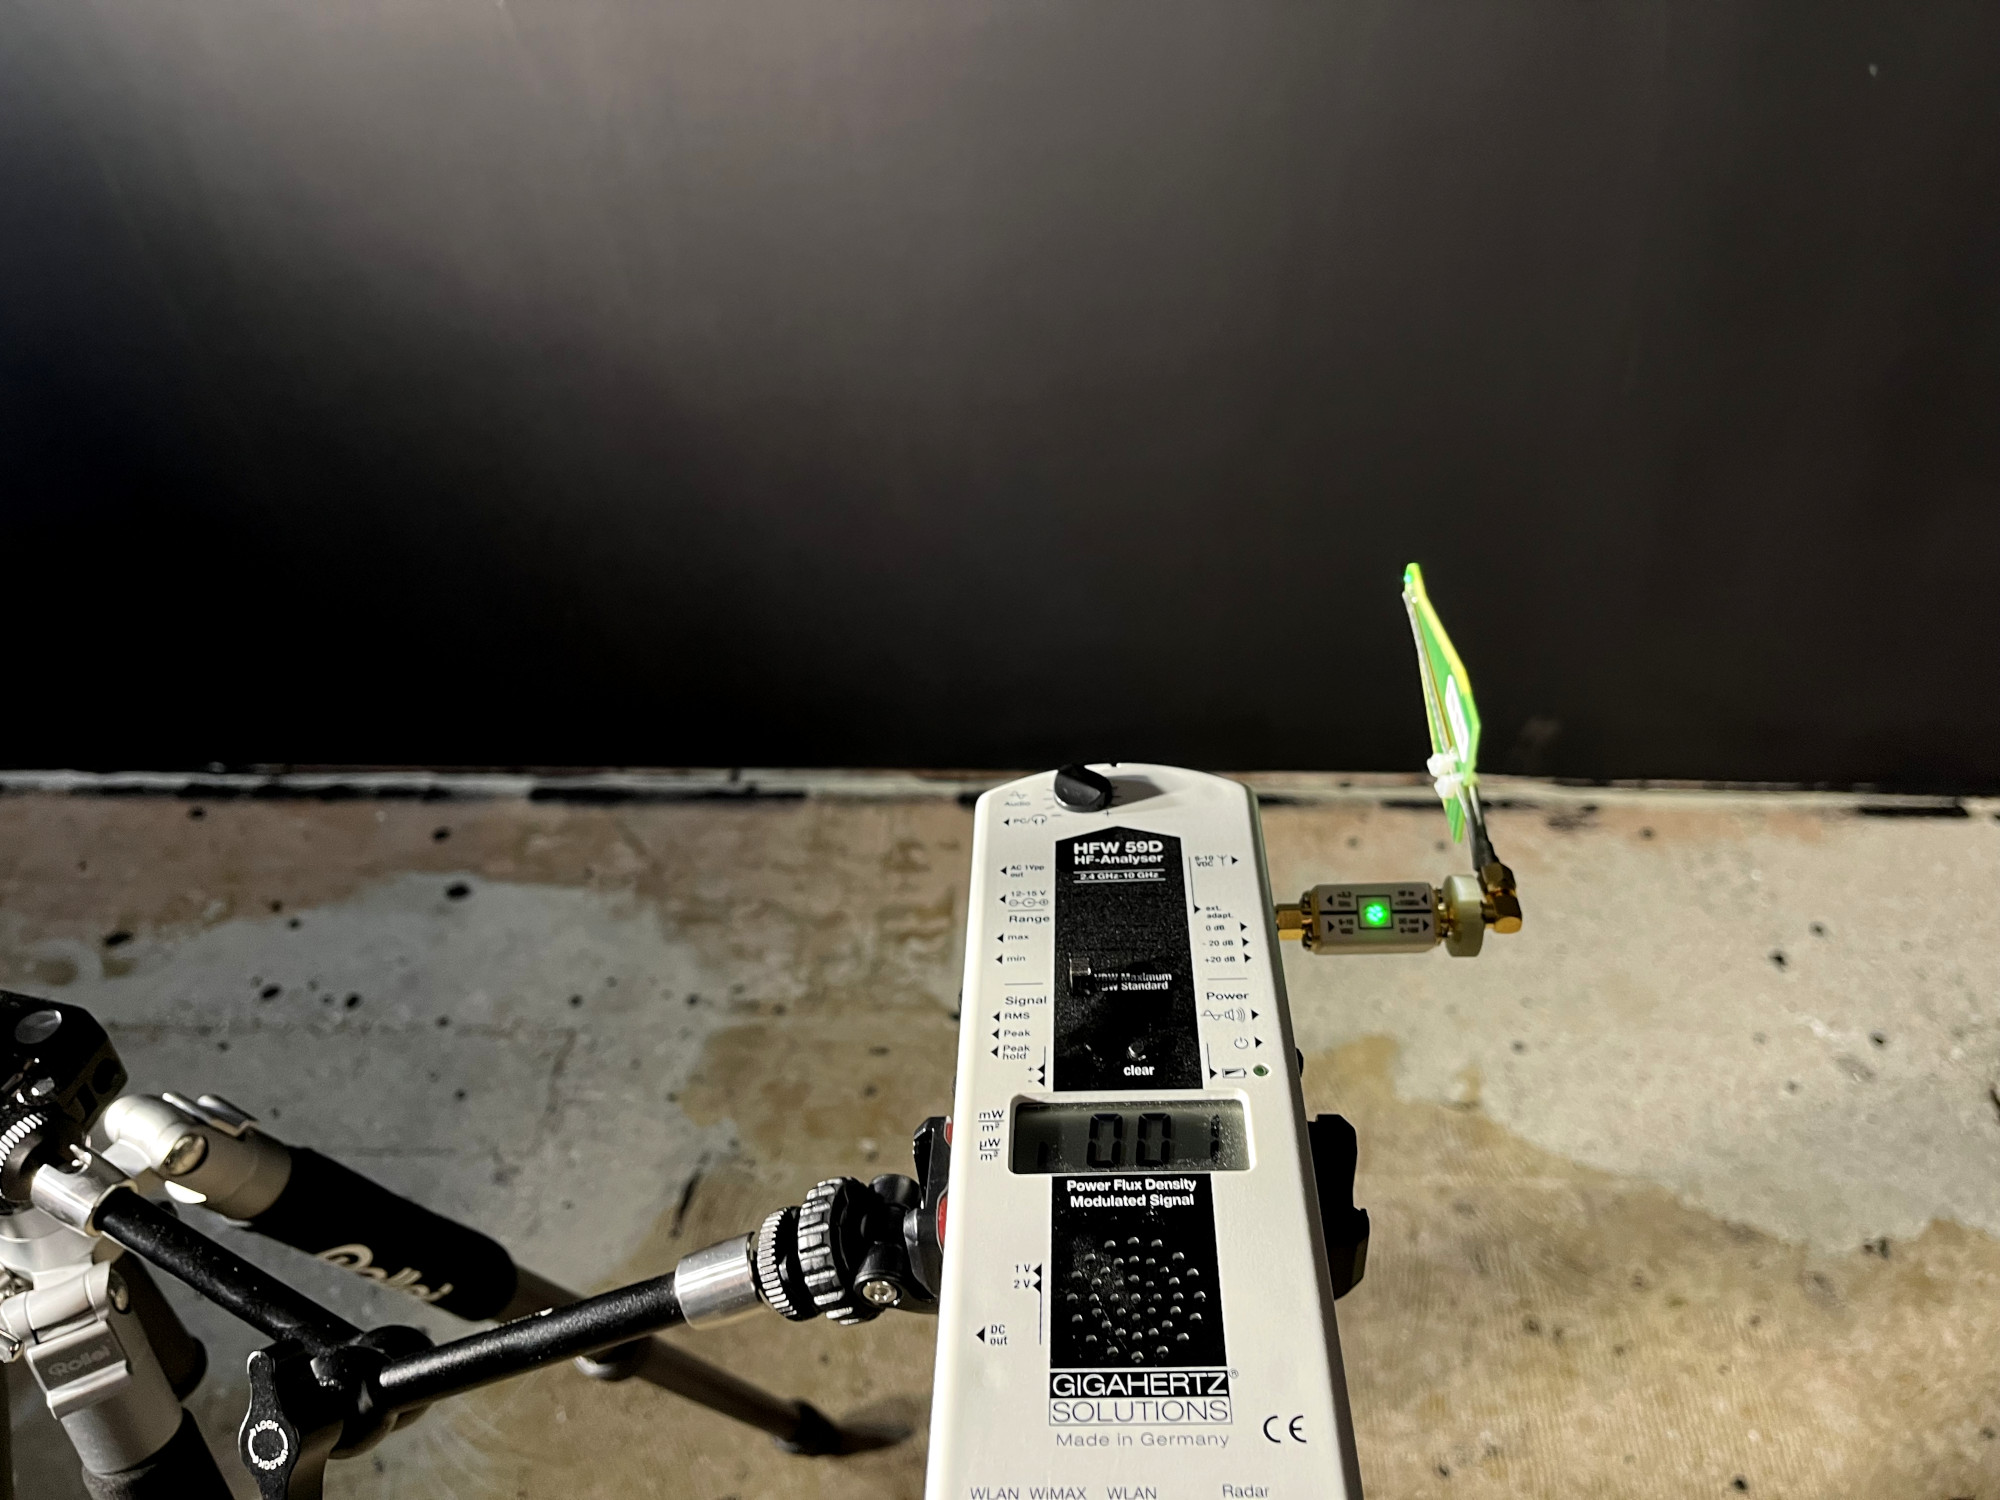 Gigahertz Solutions measuring device in front of a black wall with shielding paint